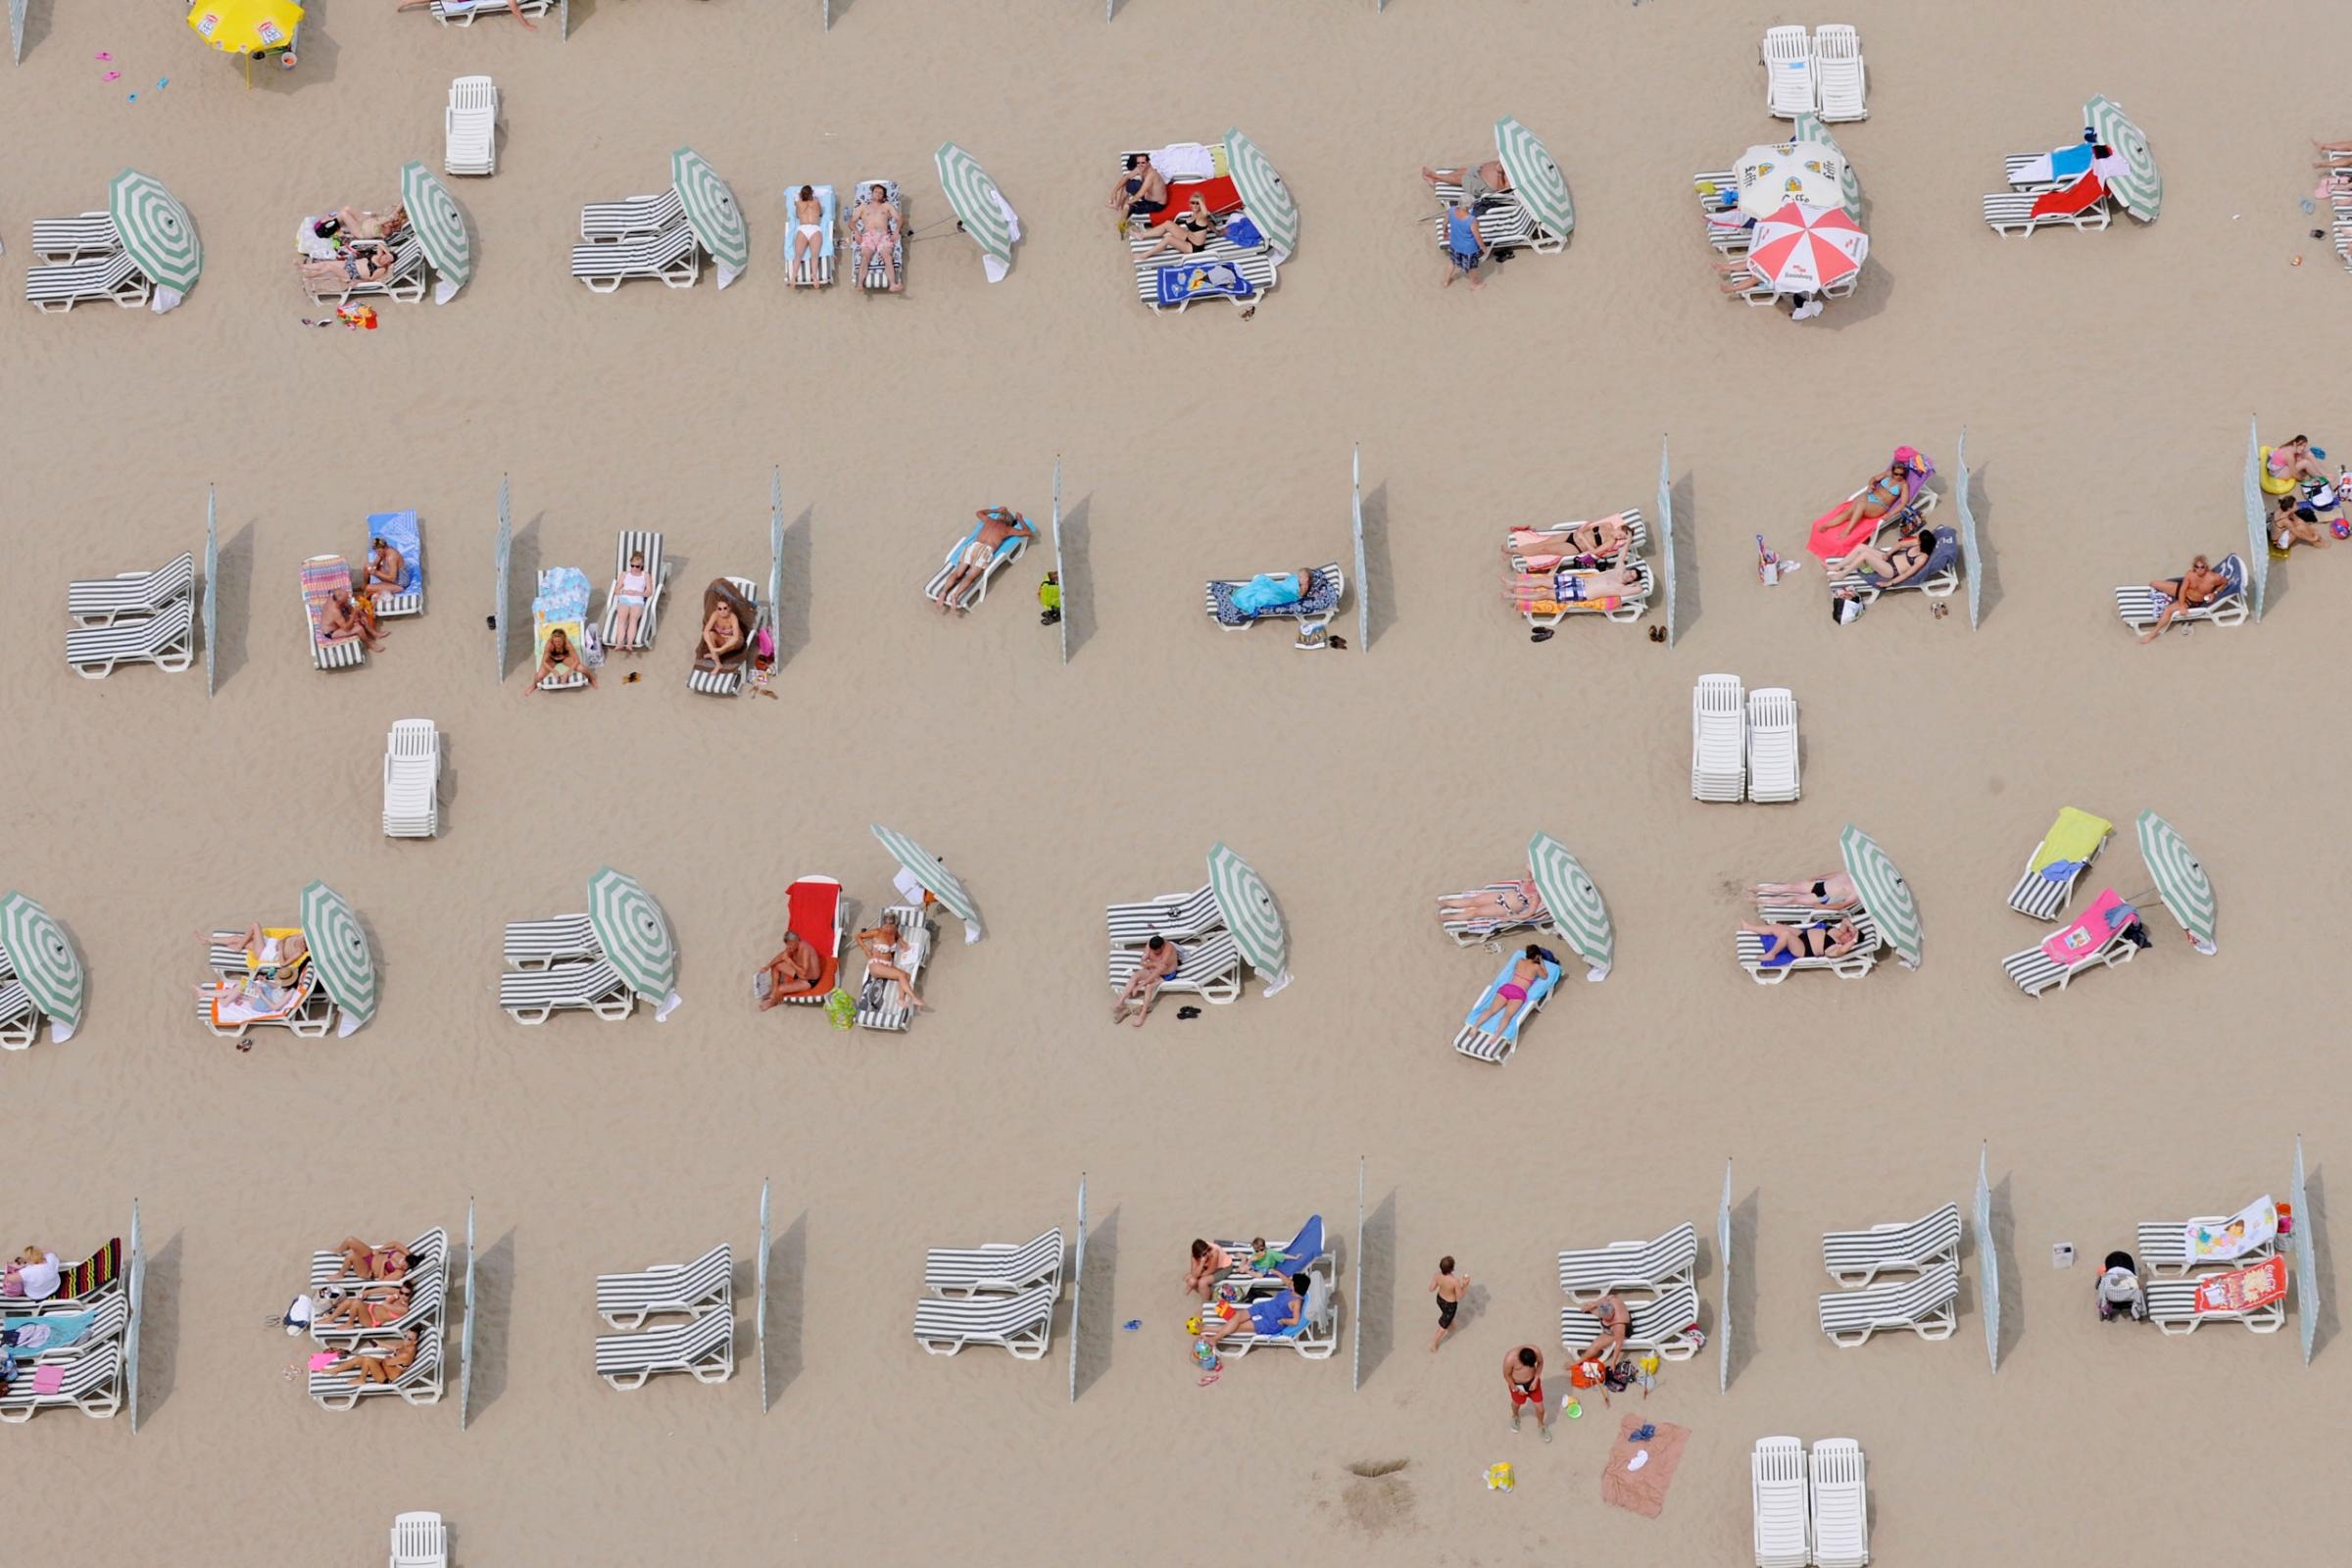 Sunbathers from Above